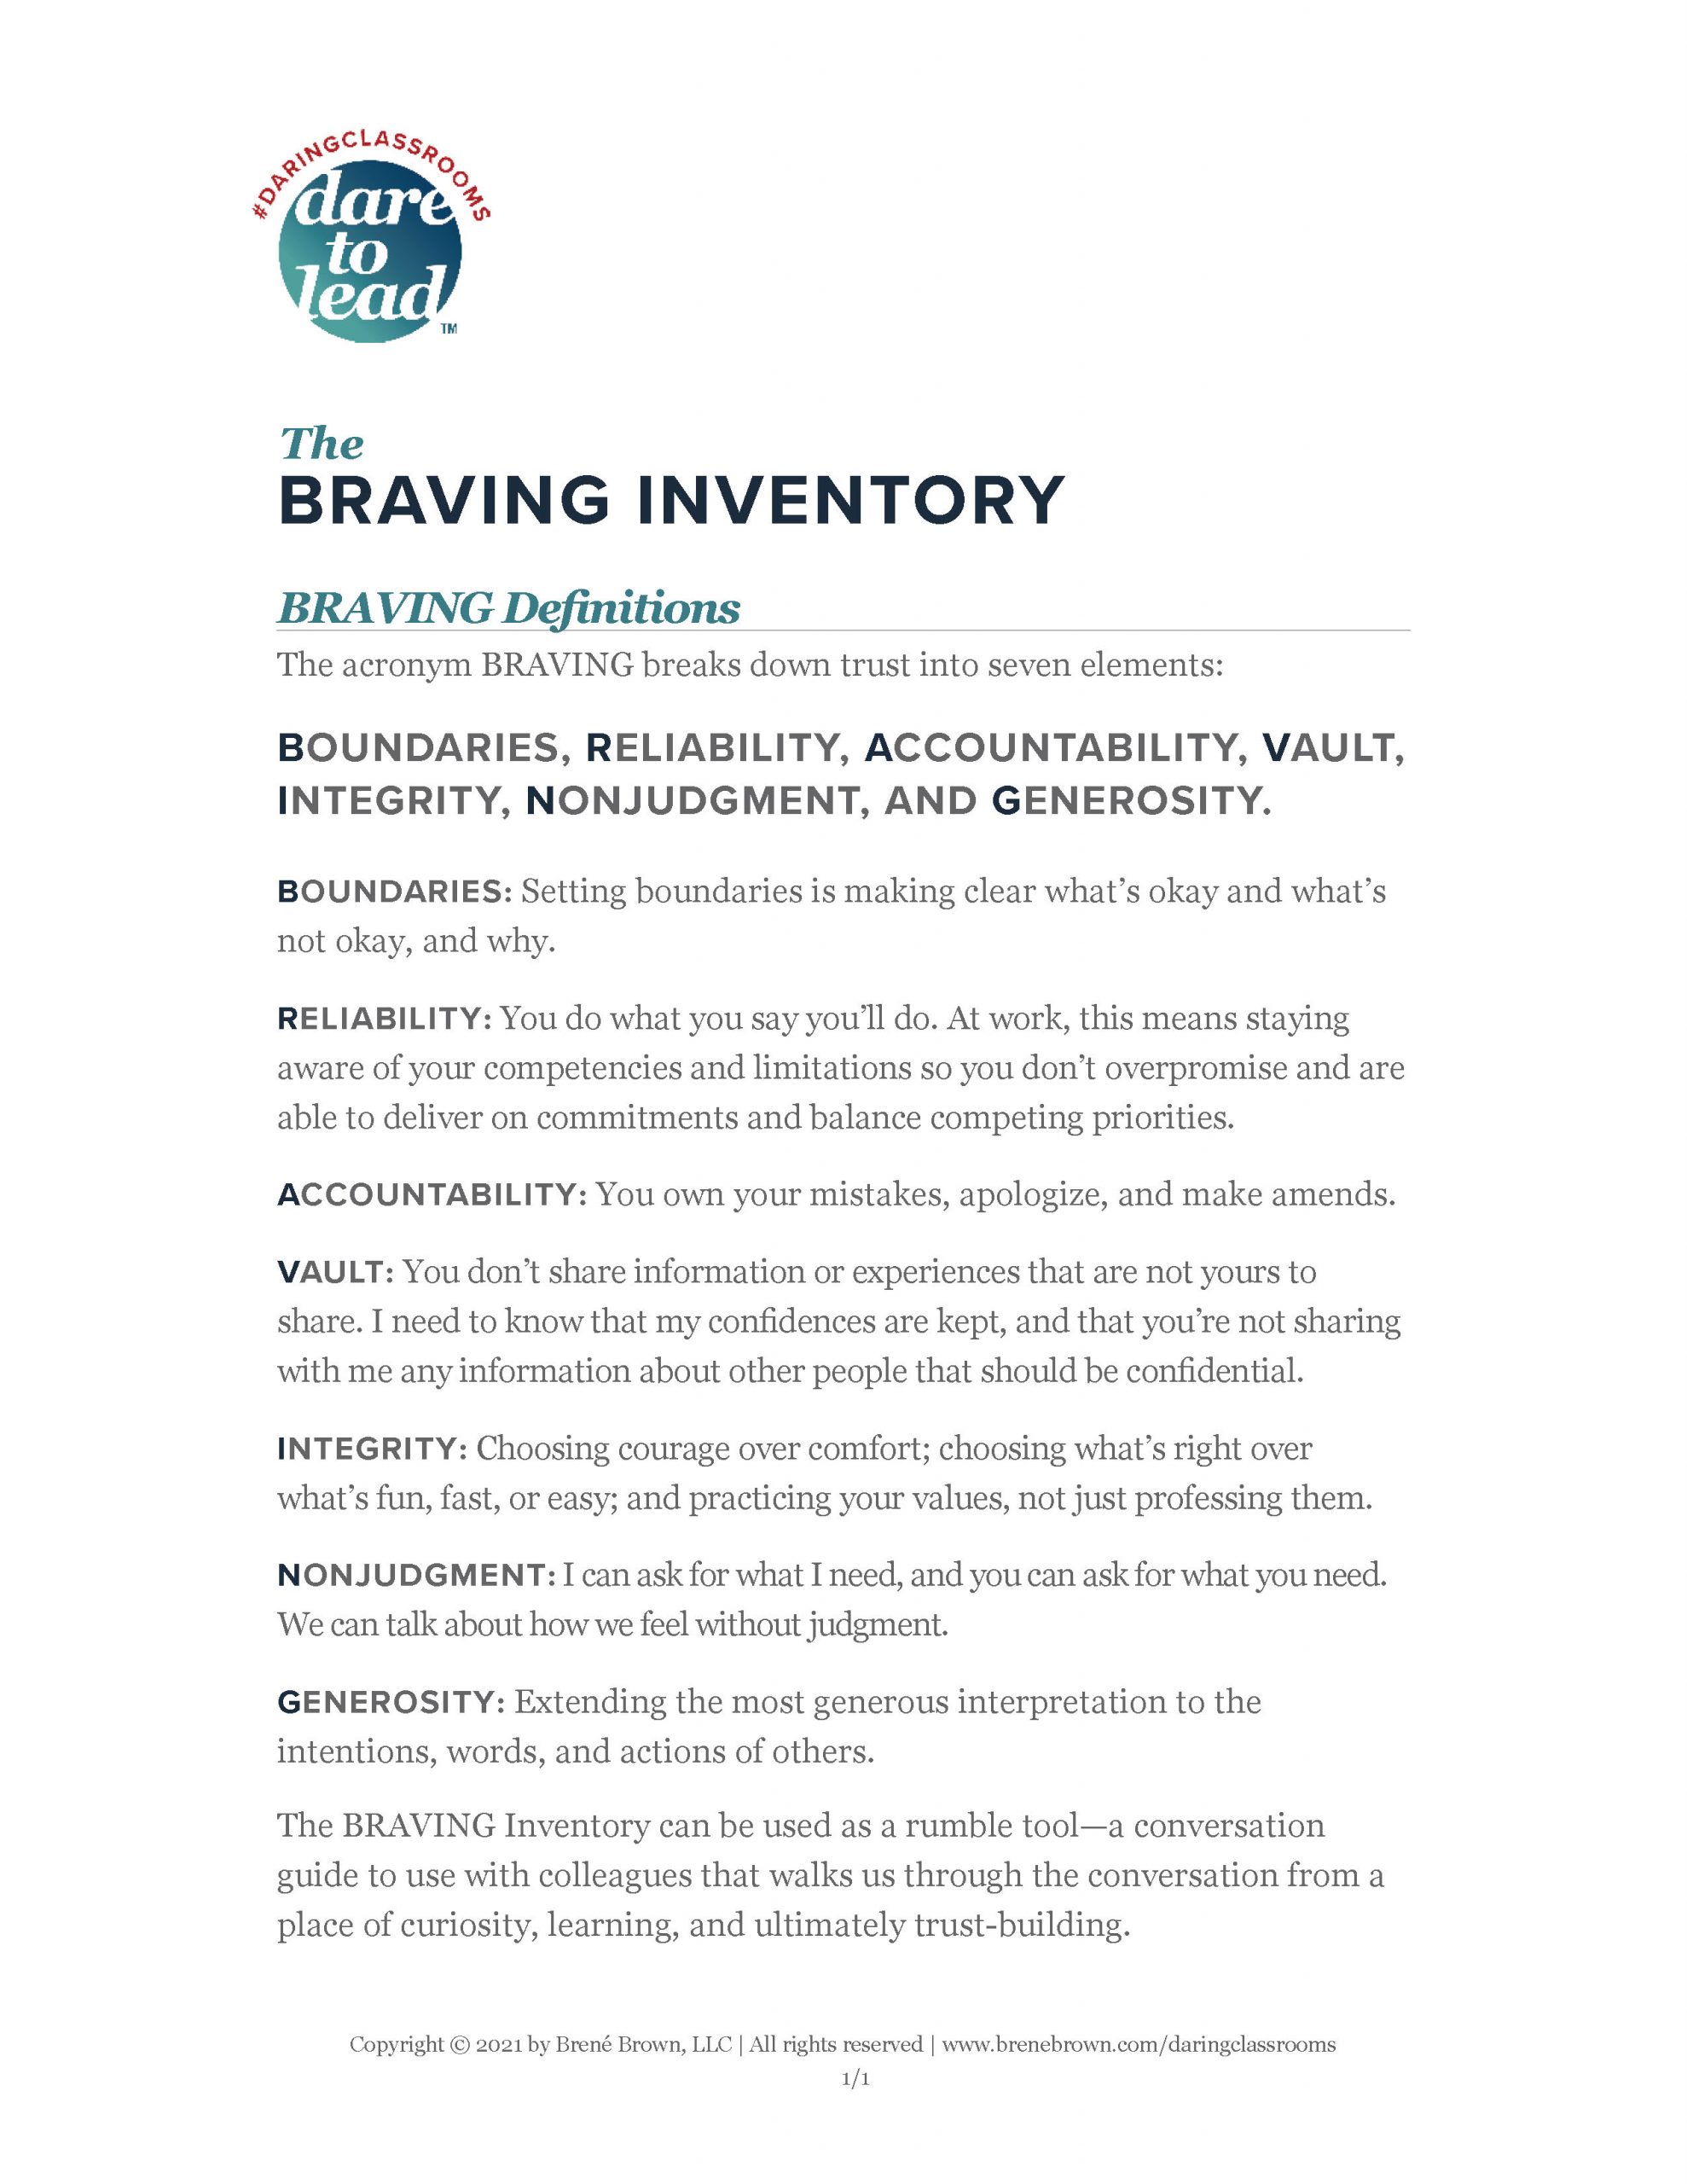 The BRAVING Inventory